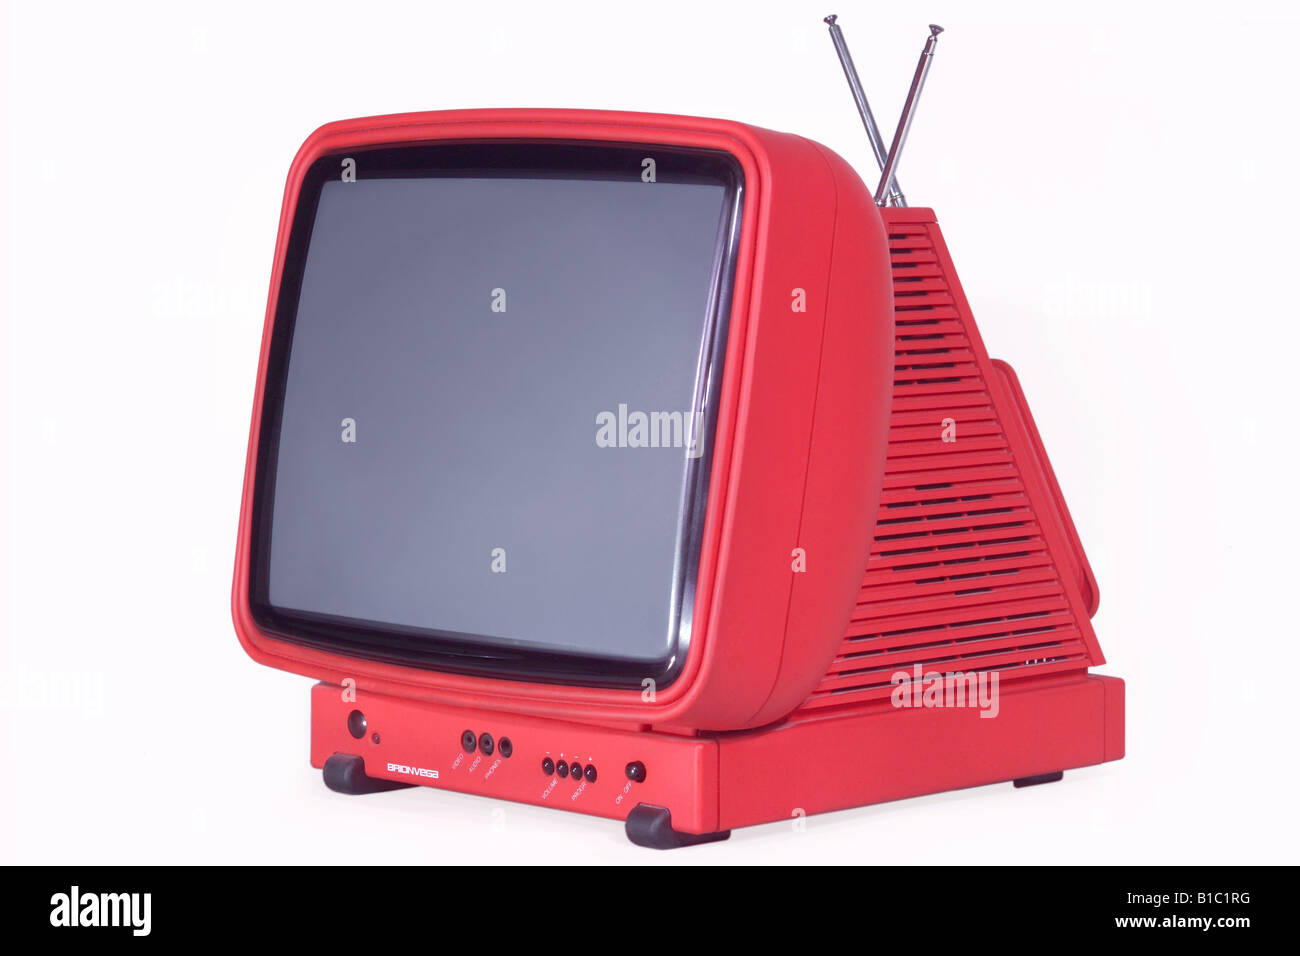 broadcast, television, TV set, typ Brionvega best 15 2, Italy, 1995,  historic, historical, technics, technic, invention, clipping, 1990s,  portable, antenna, red, plastic case, designed by Mario Bellini, design,  produced by Brionvega S.p.A.,